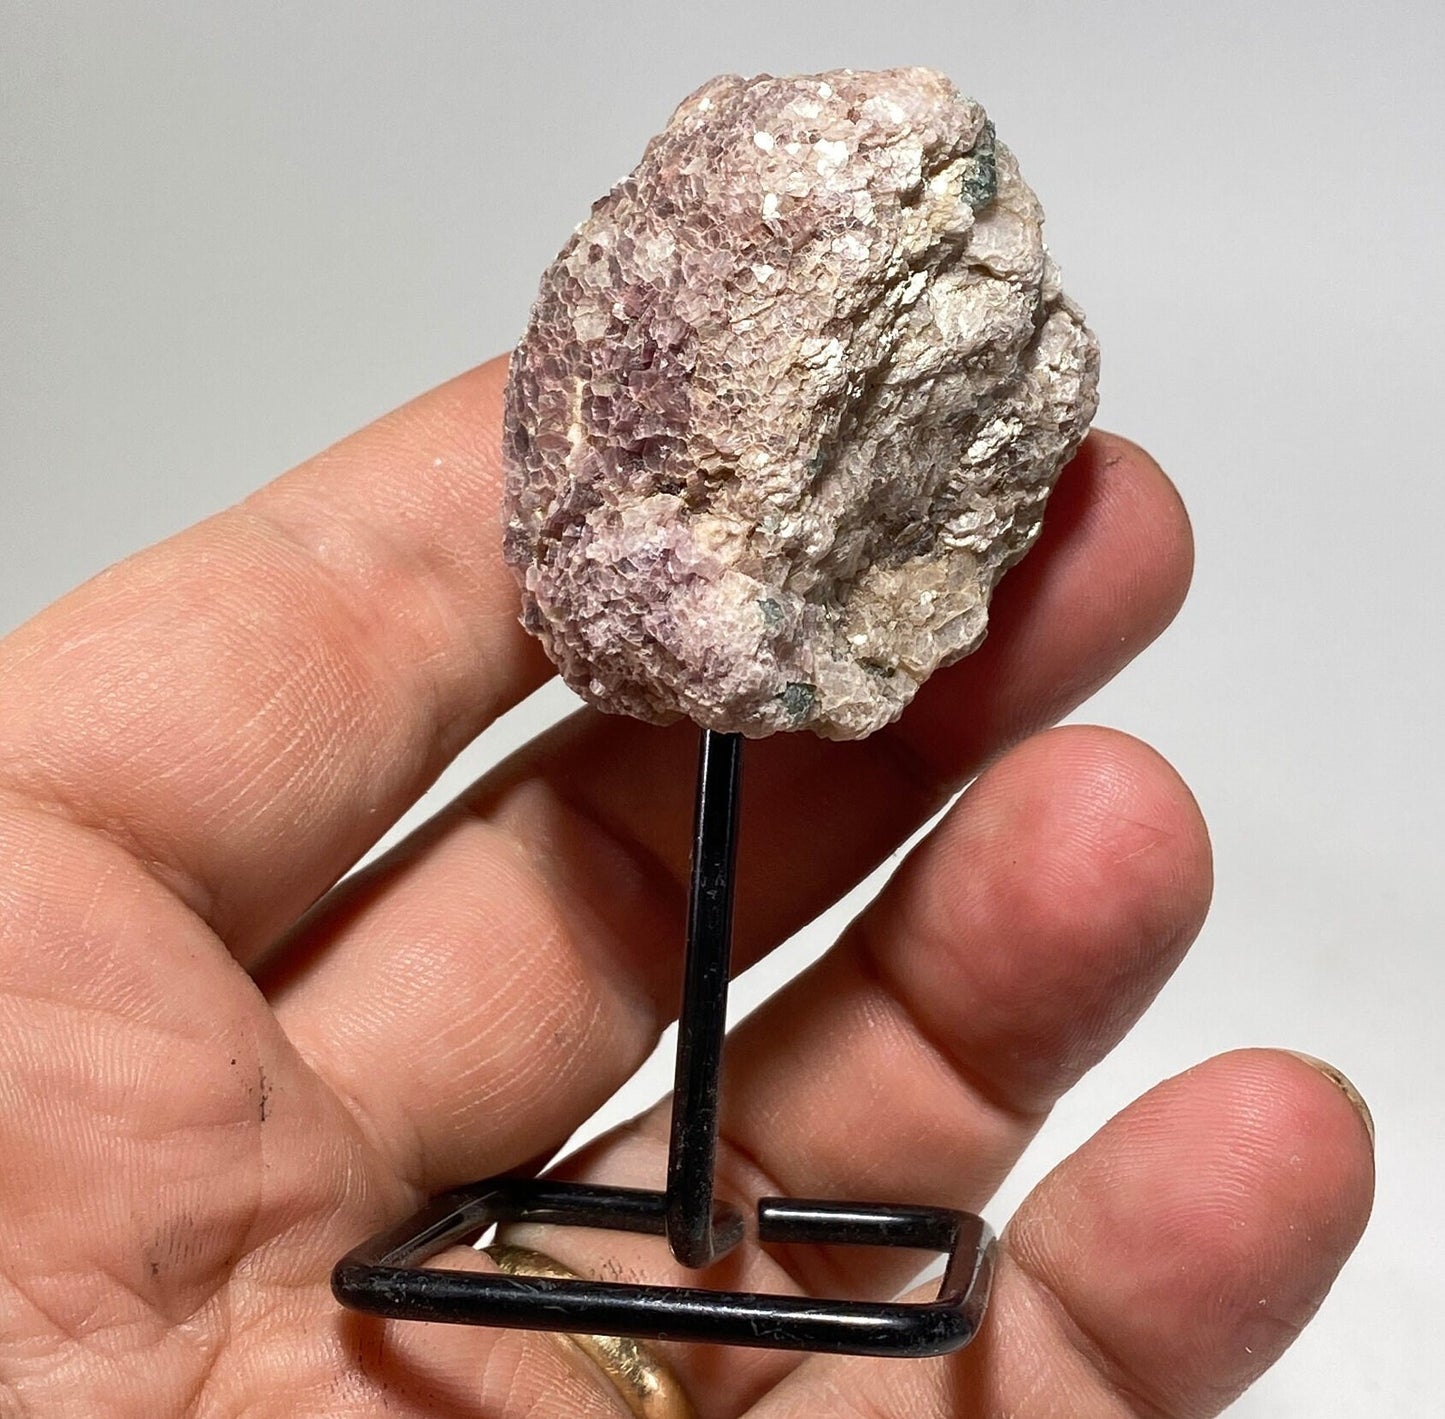 Mineral Specimens on a metal stand